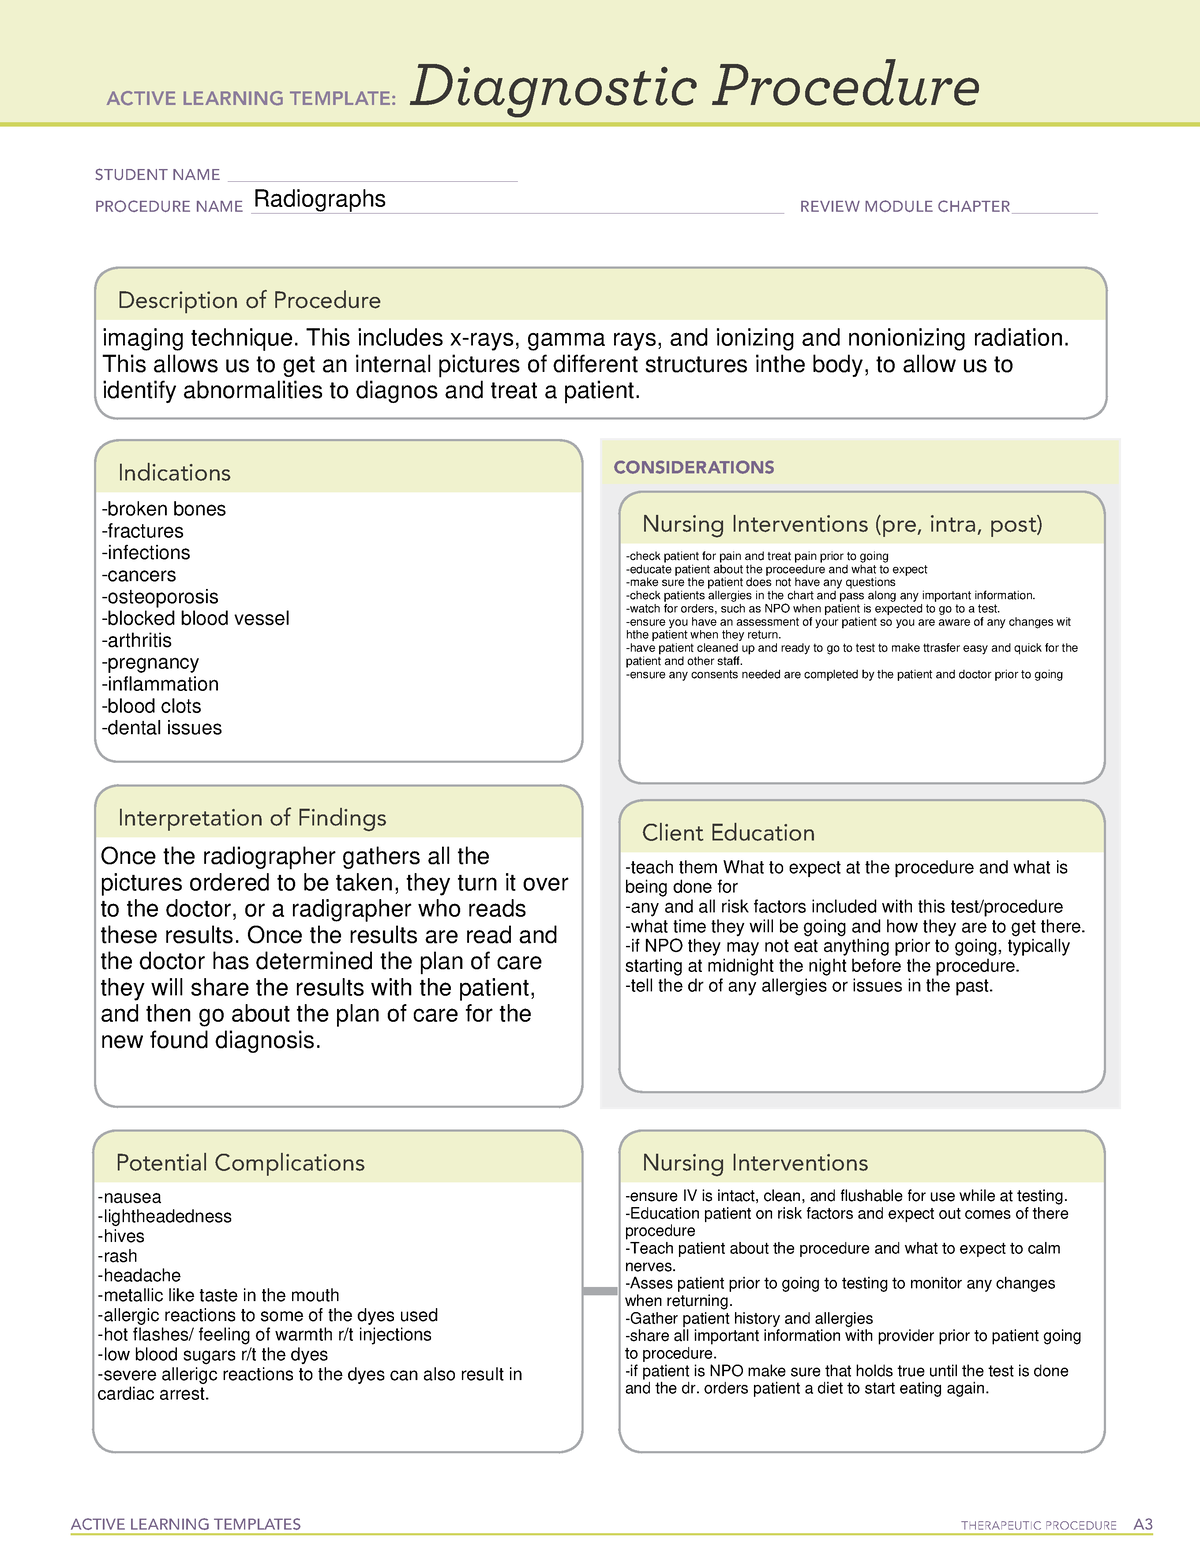 ati-diagnostic-study-radiology-template-active-learning-templates-therapeutic-procedure-a